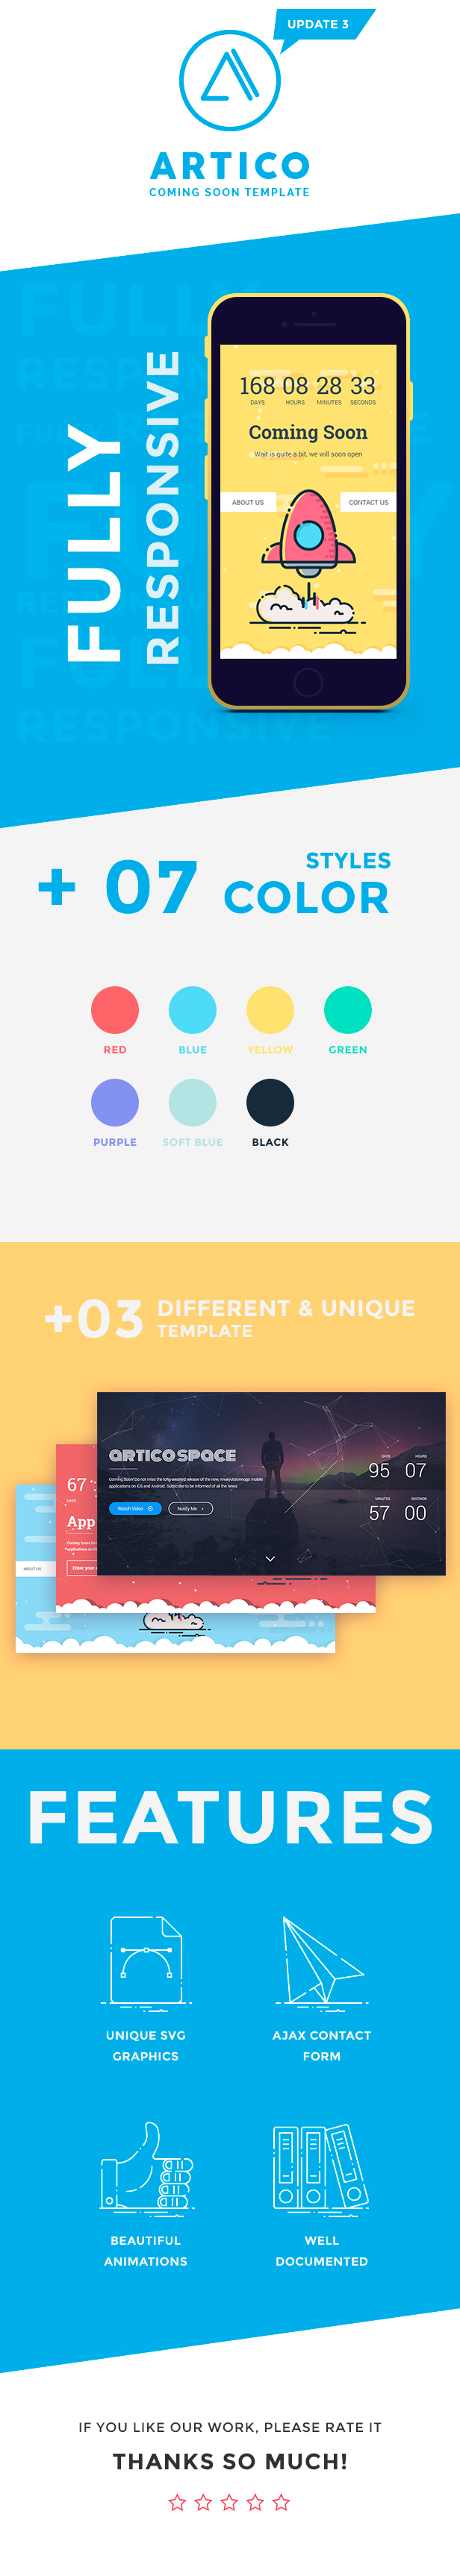 Artico - Responsive Coming Soon Template - 1